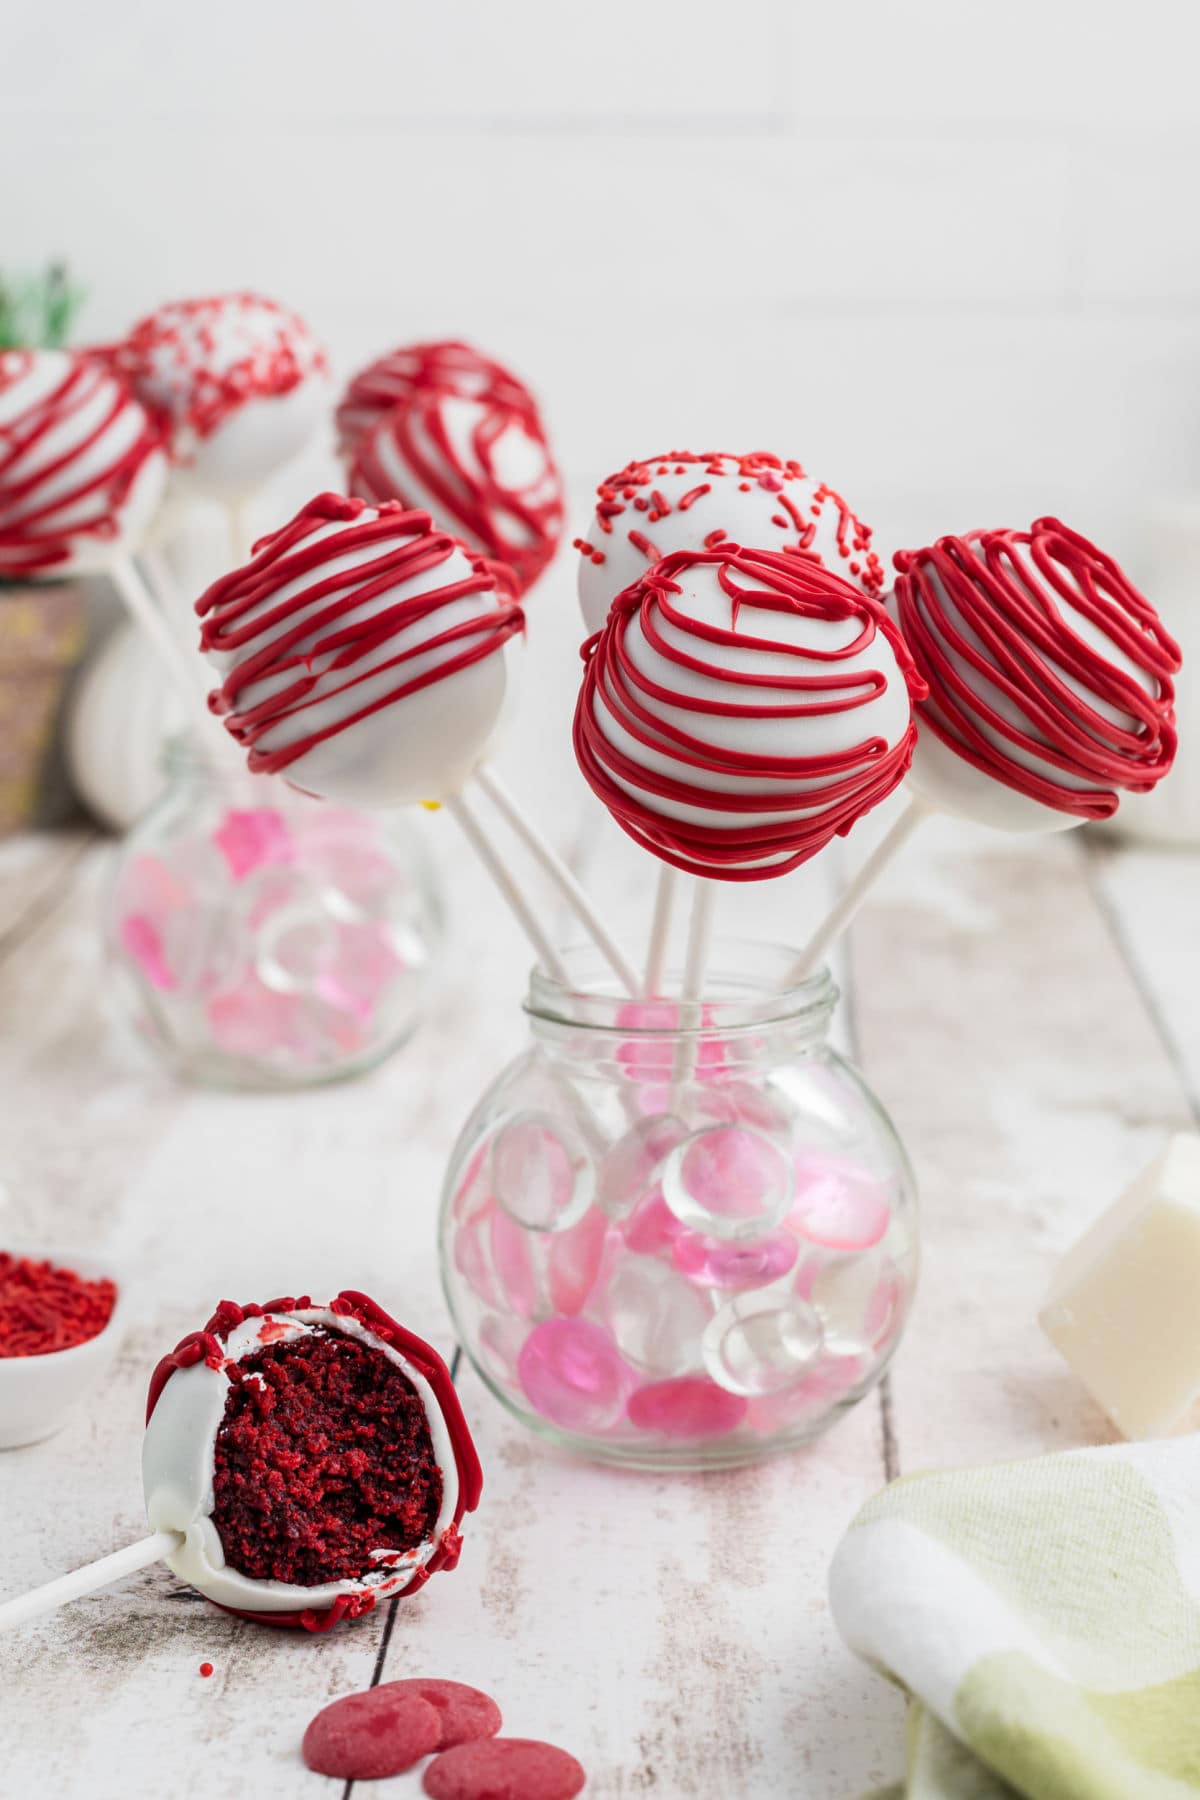 White chocolate dipped cake pops with red decorating.